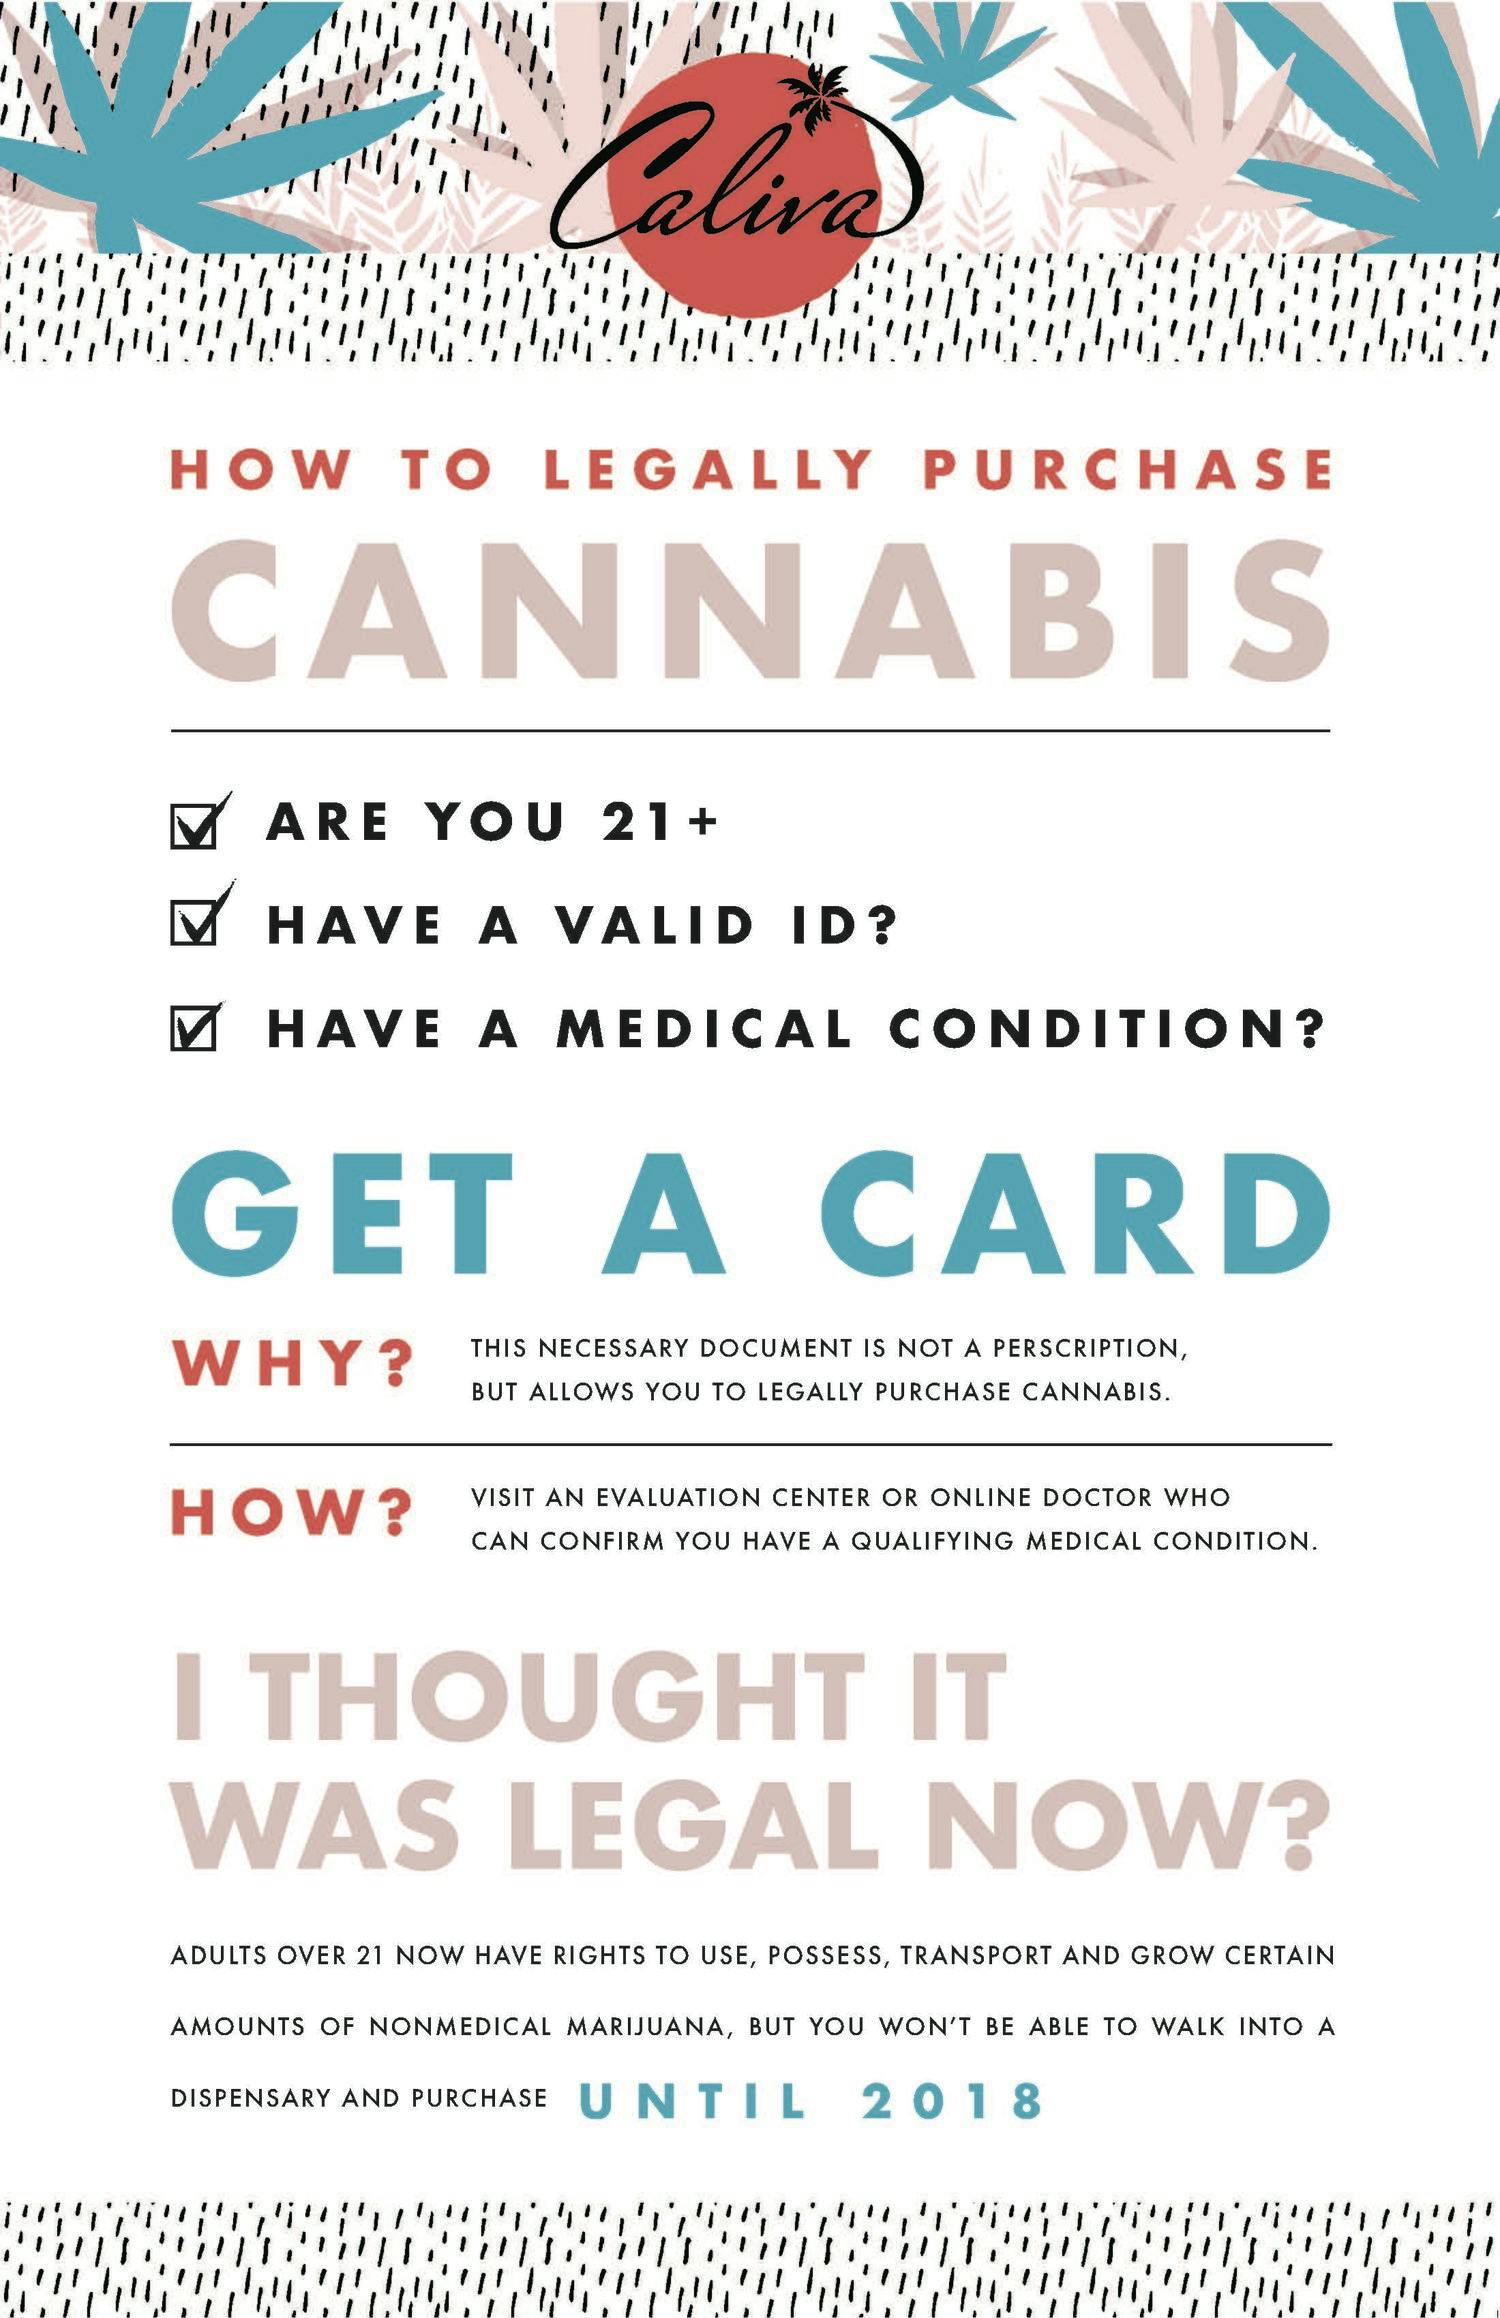 How To Legally Purchase Cannabis